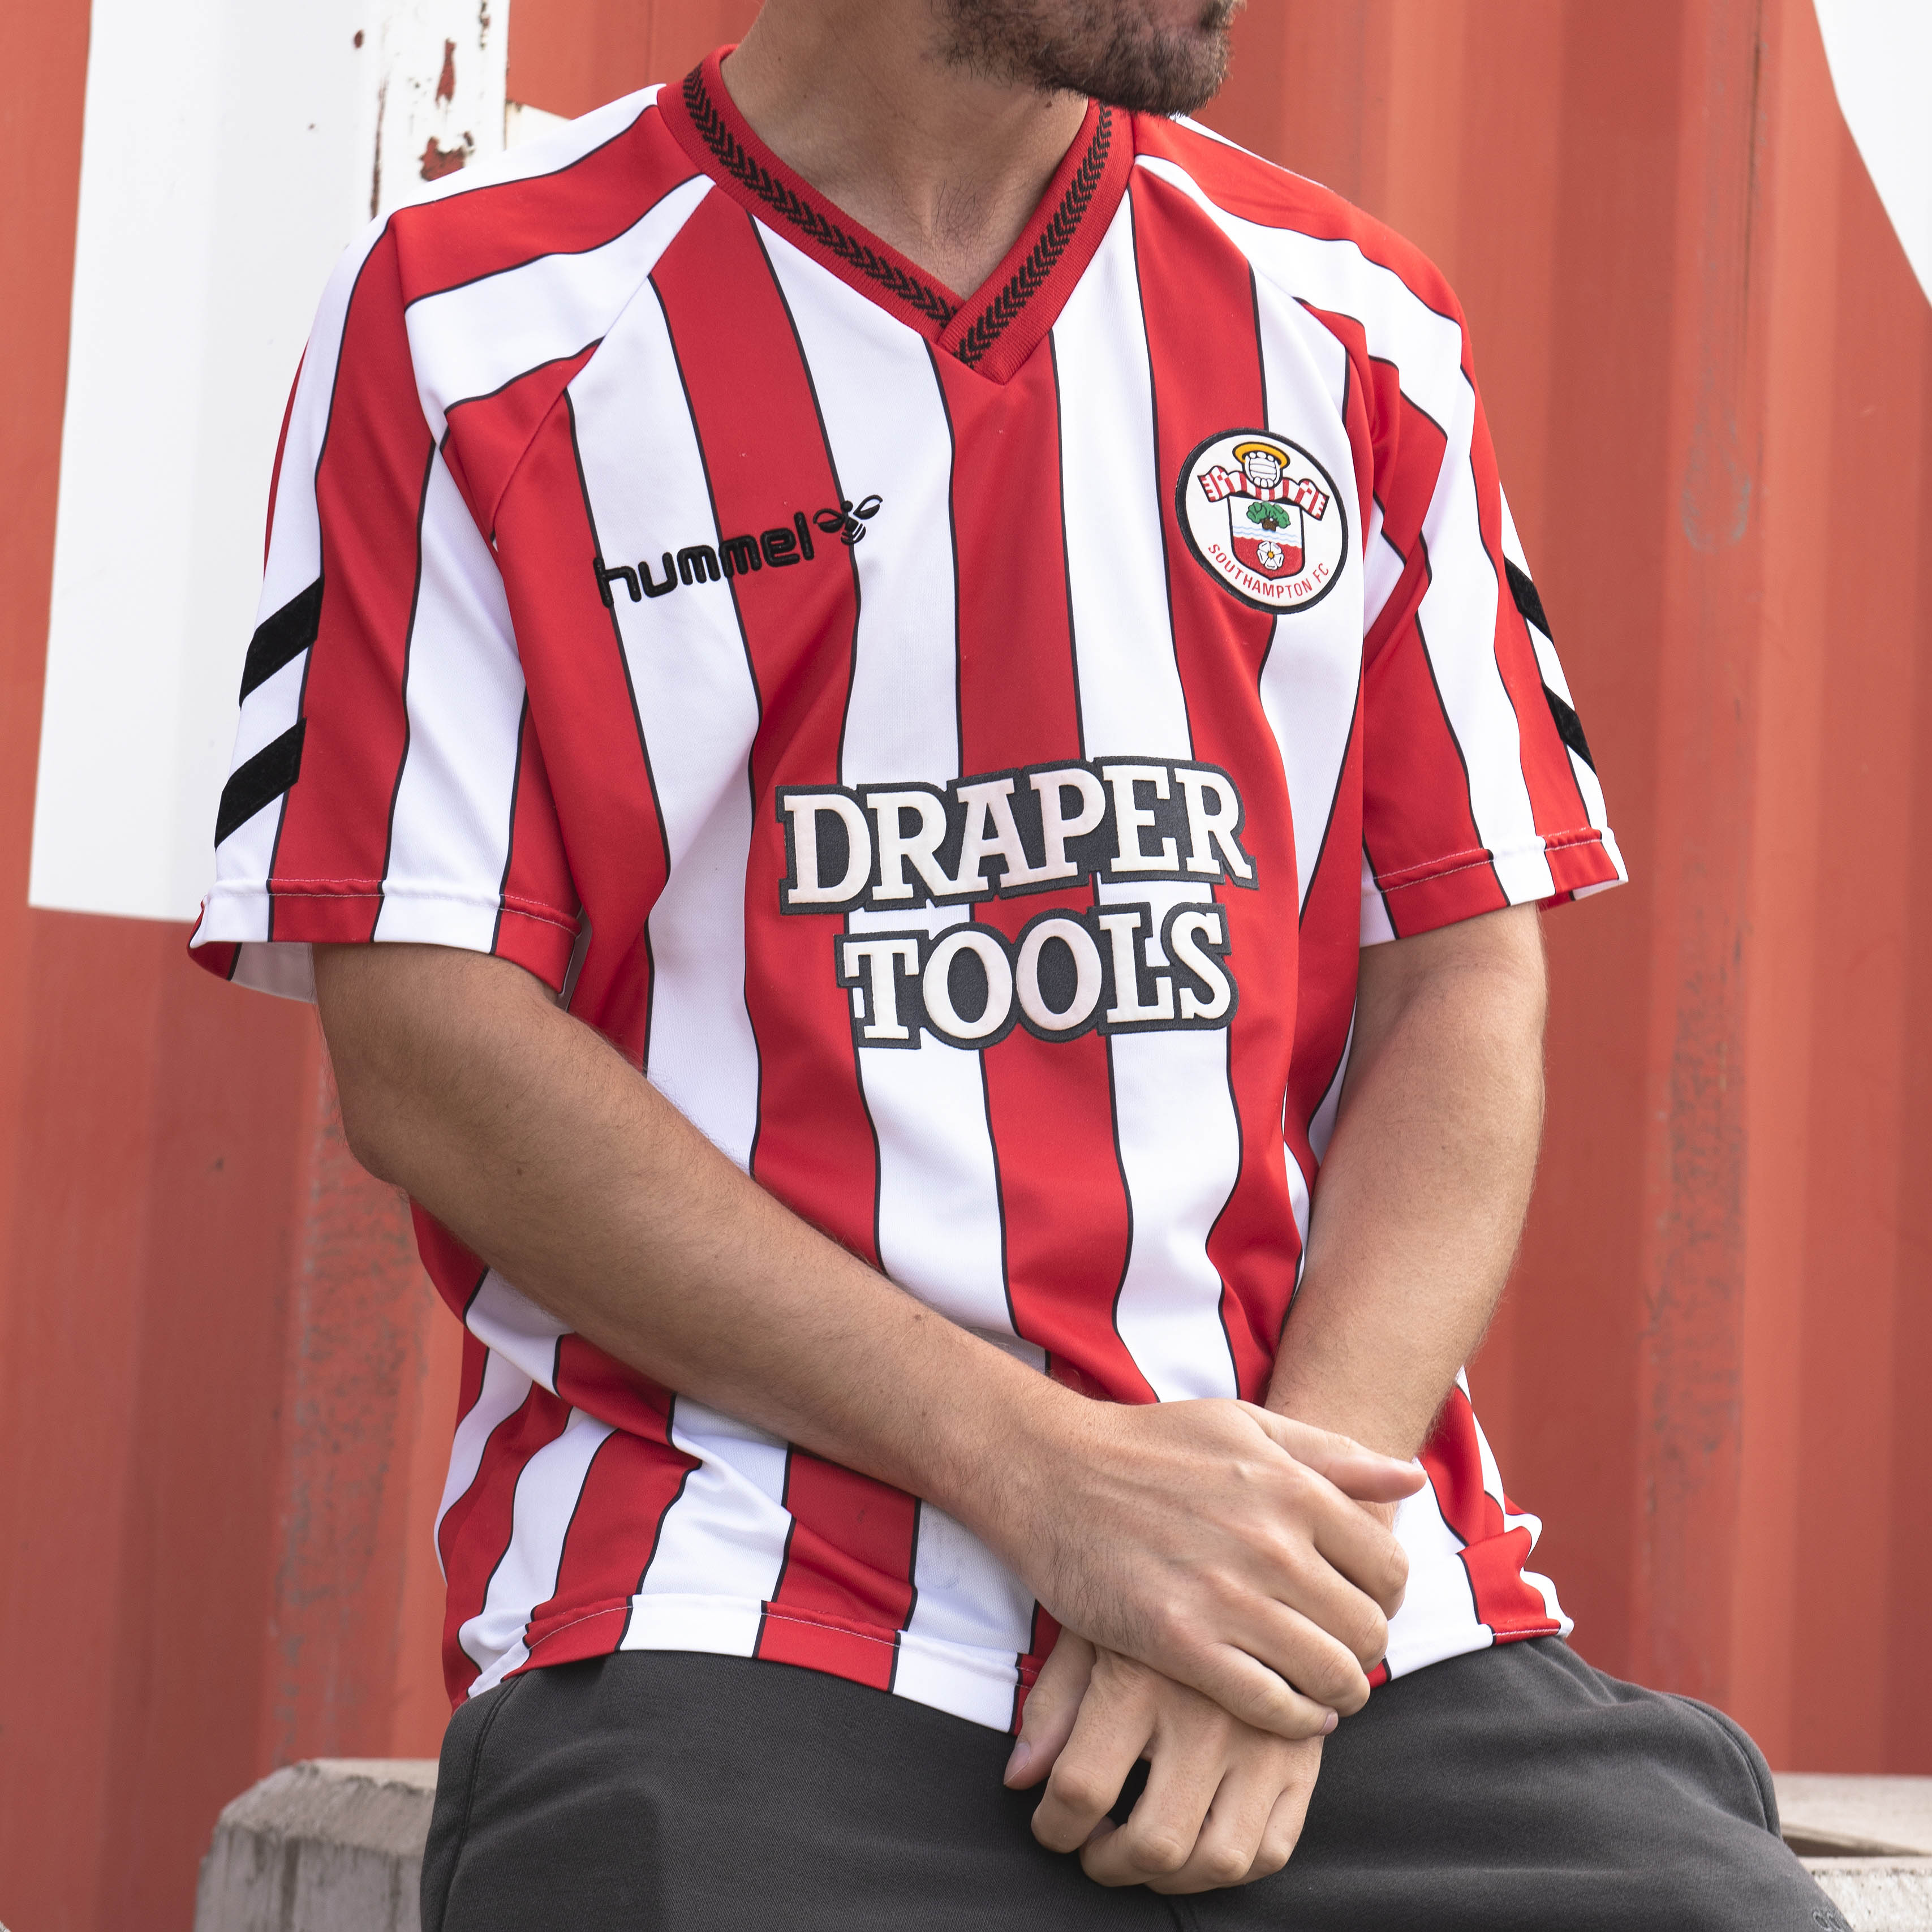 ubemandede kaptajn enhed Classic Football Shirts on X: "Southampton 1989 Home by Hummel 🌟 Hitting  the site on Thursday in a size XL. https://t.co/6cM3Es344Y" / X